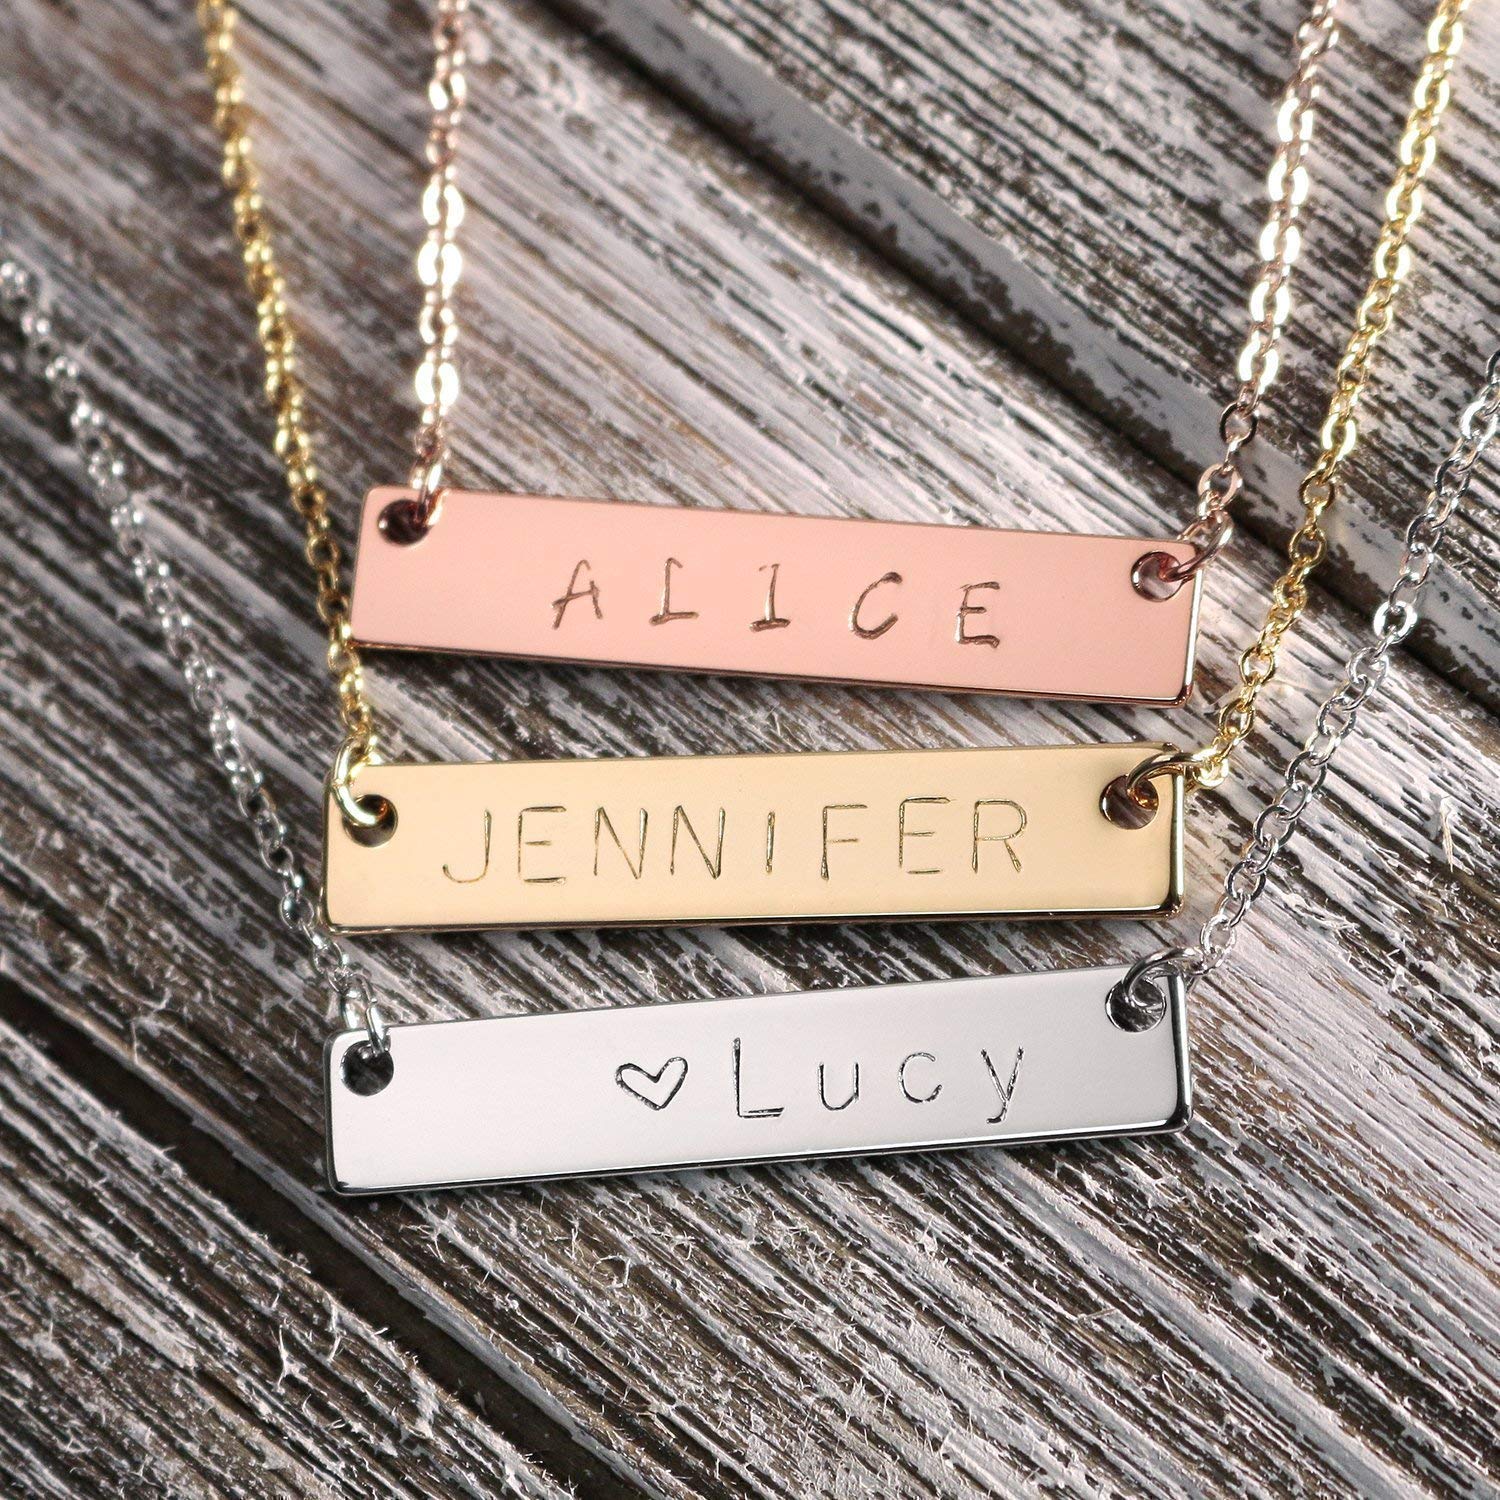 Buy Custom Engraved Necklace With Dainty Bar - Personalized 16K Plated Jewelry at Petite Boutique